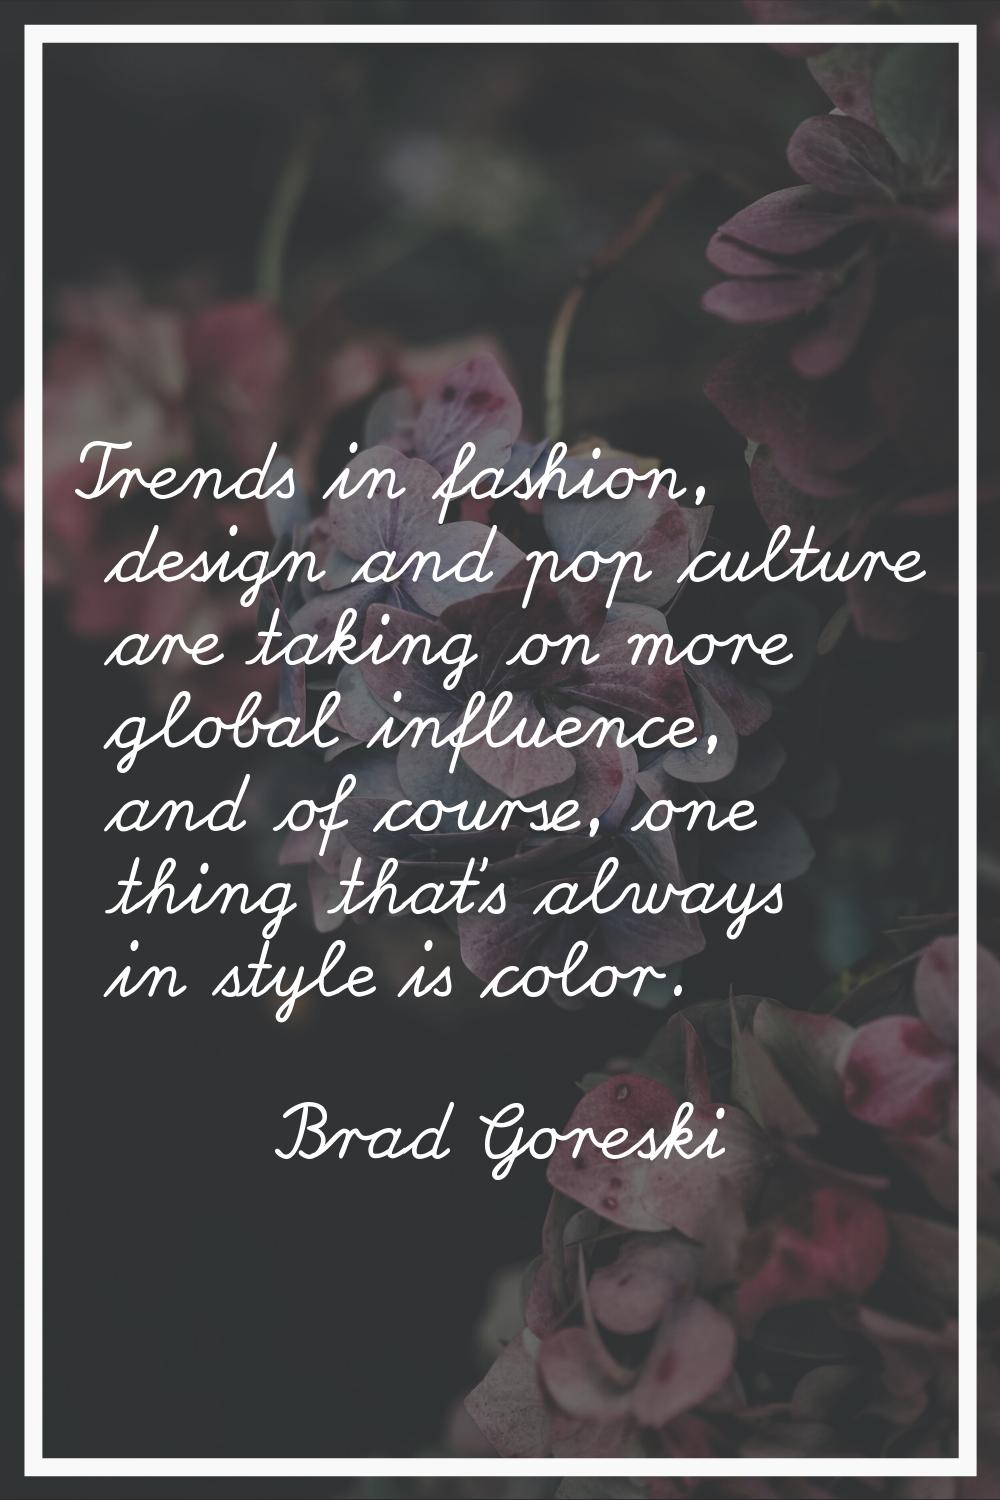 Trends in fashion, design and pop culture are taking on more global influence, and of course, one t